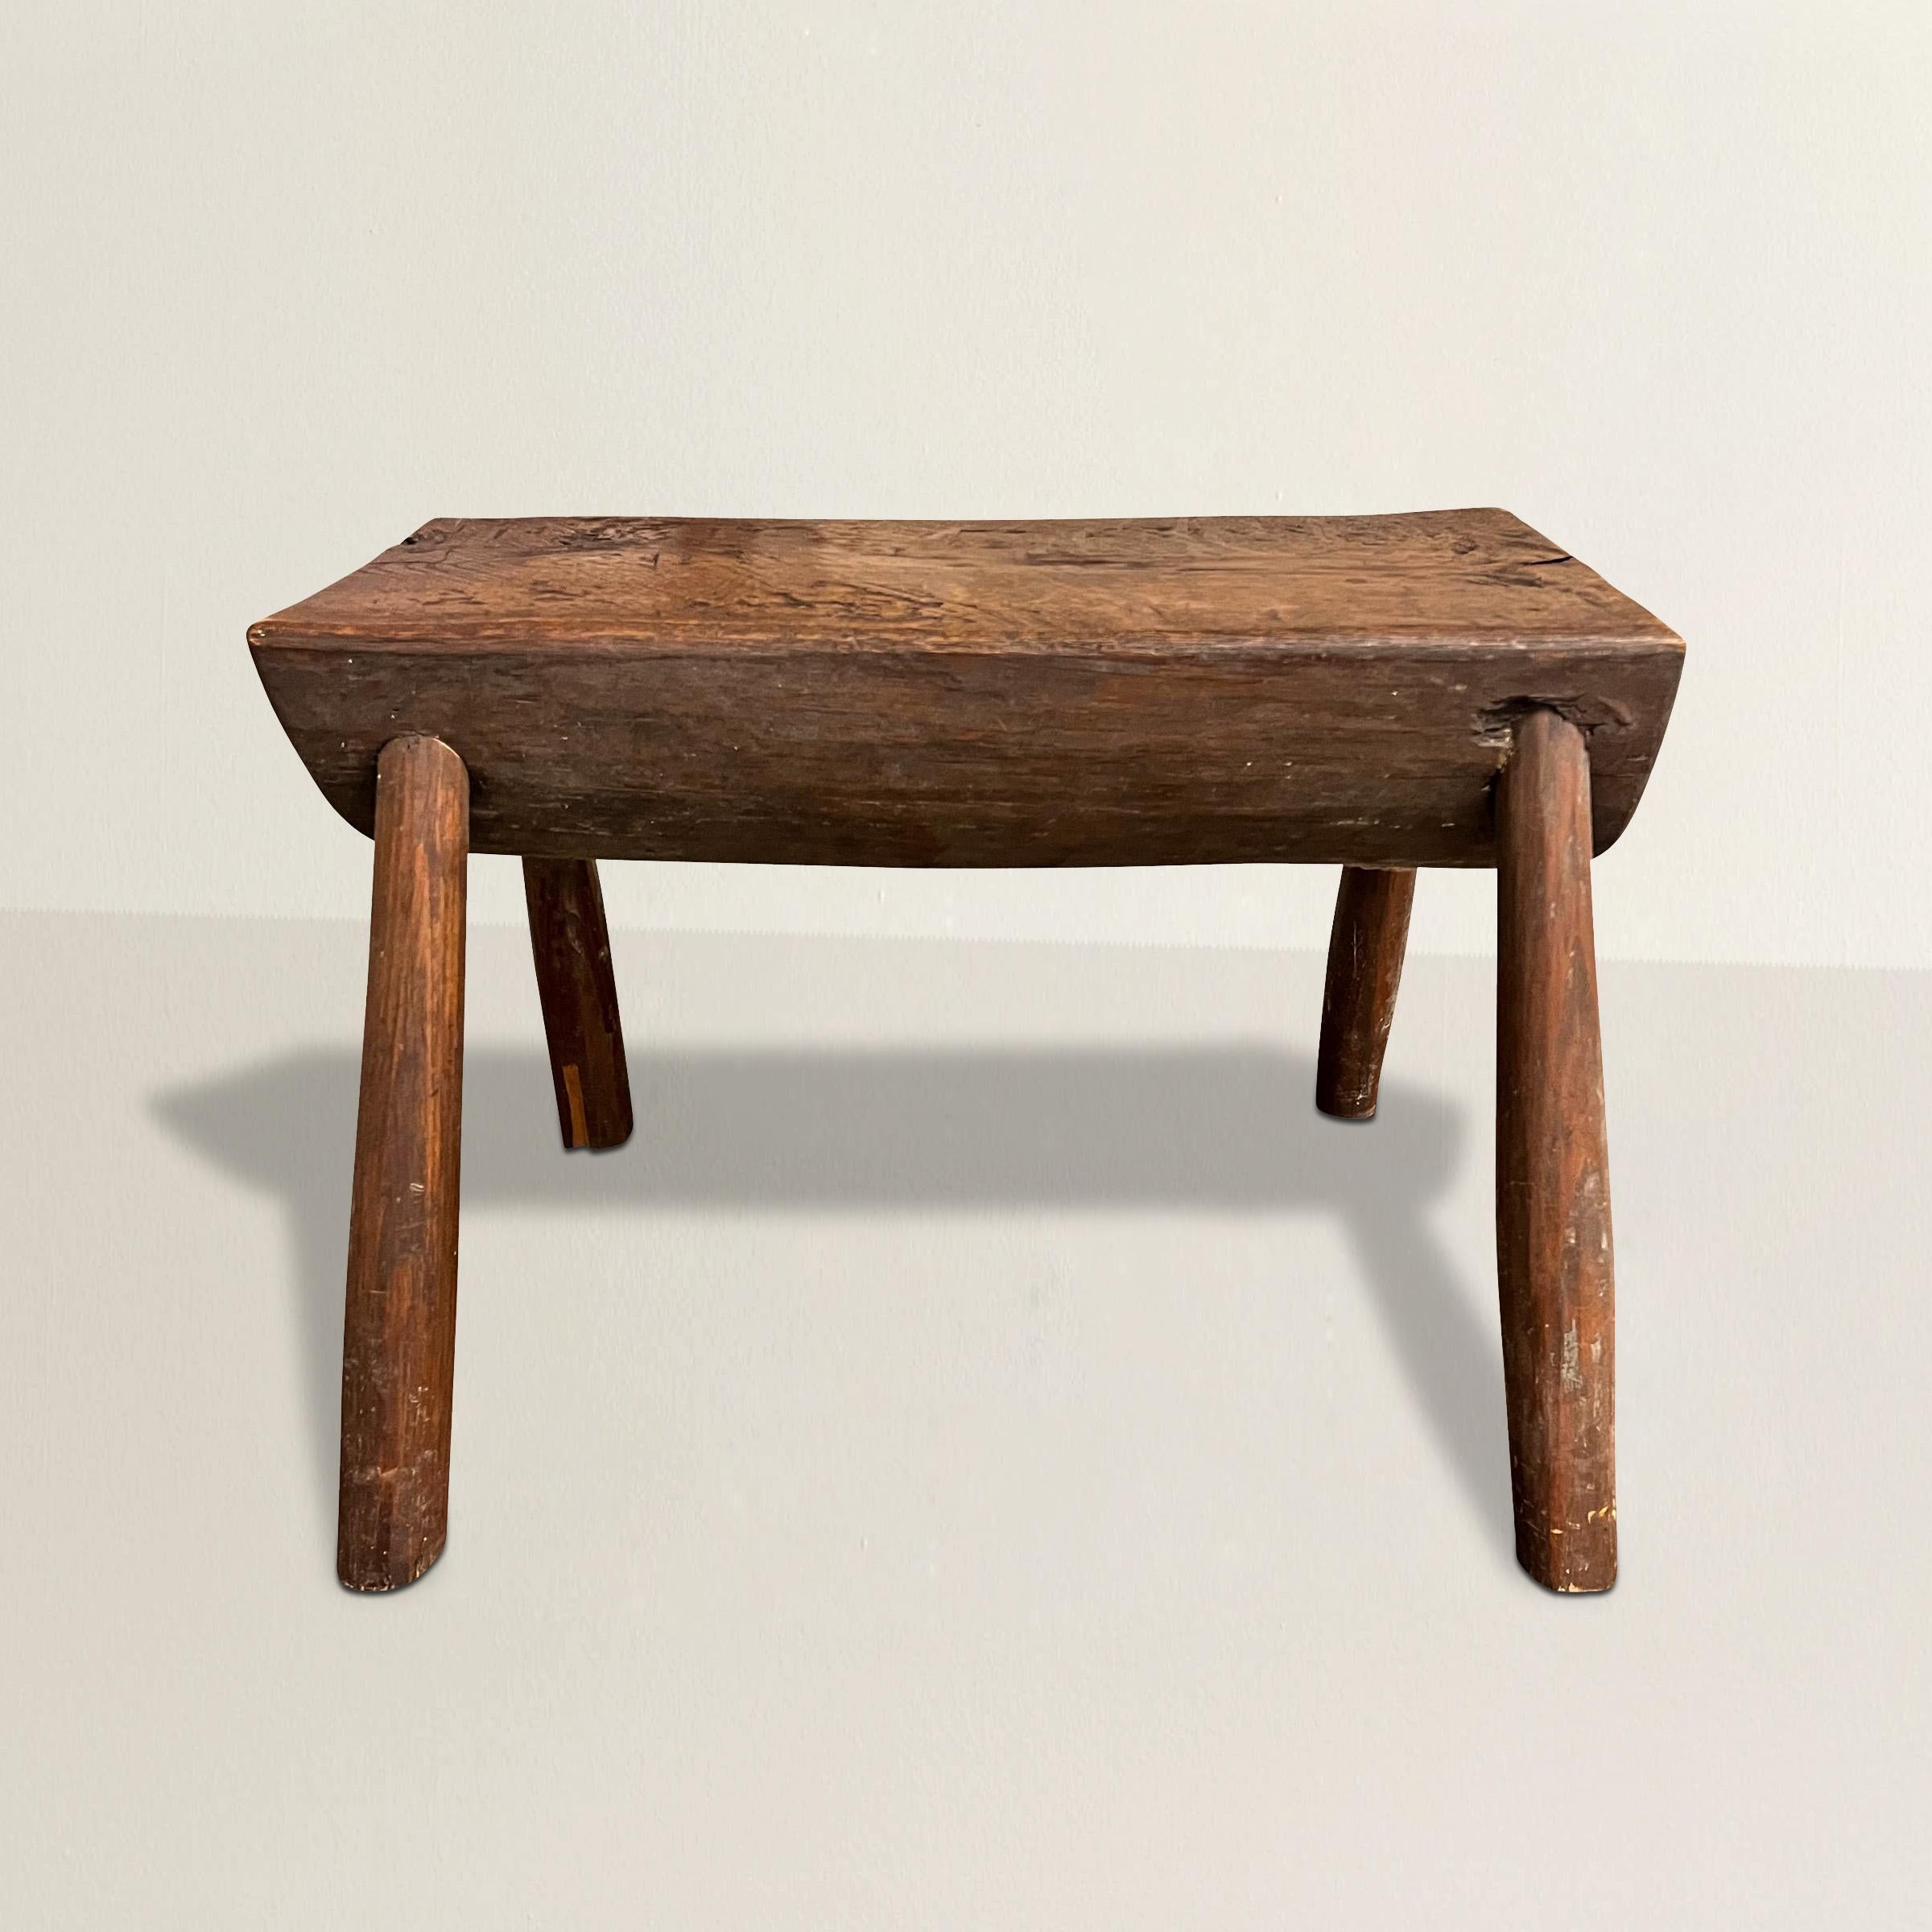 This early 20th century American primitive milking stool, with its rustic charm, embodies the essence of simplicity and ingenuity. Crafted from half of a log and supported by four skillfully whittled wood legs, this humble piece evokes a sense of